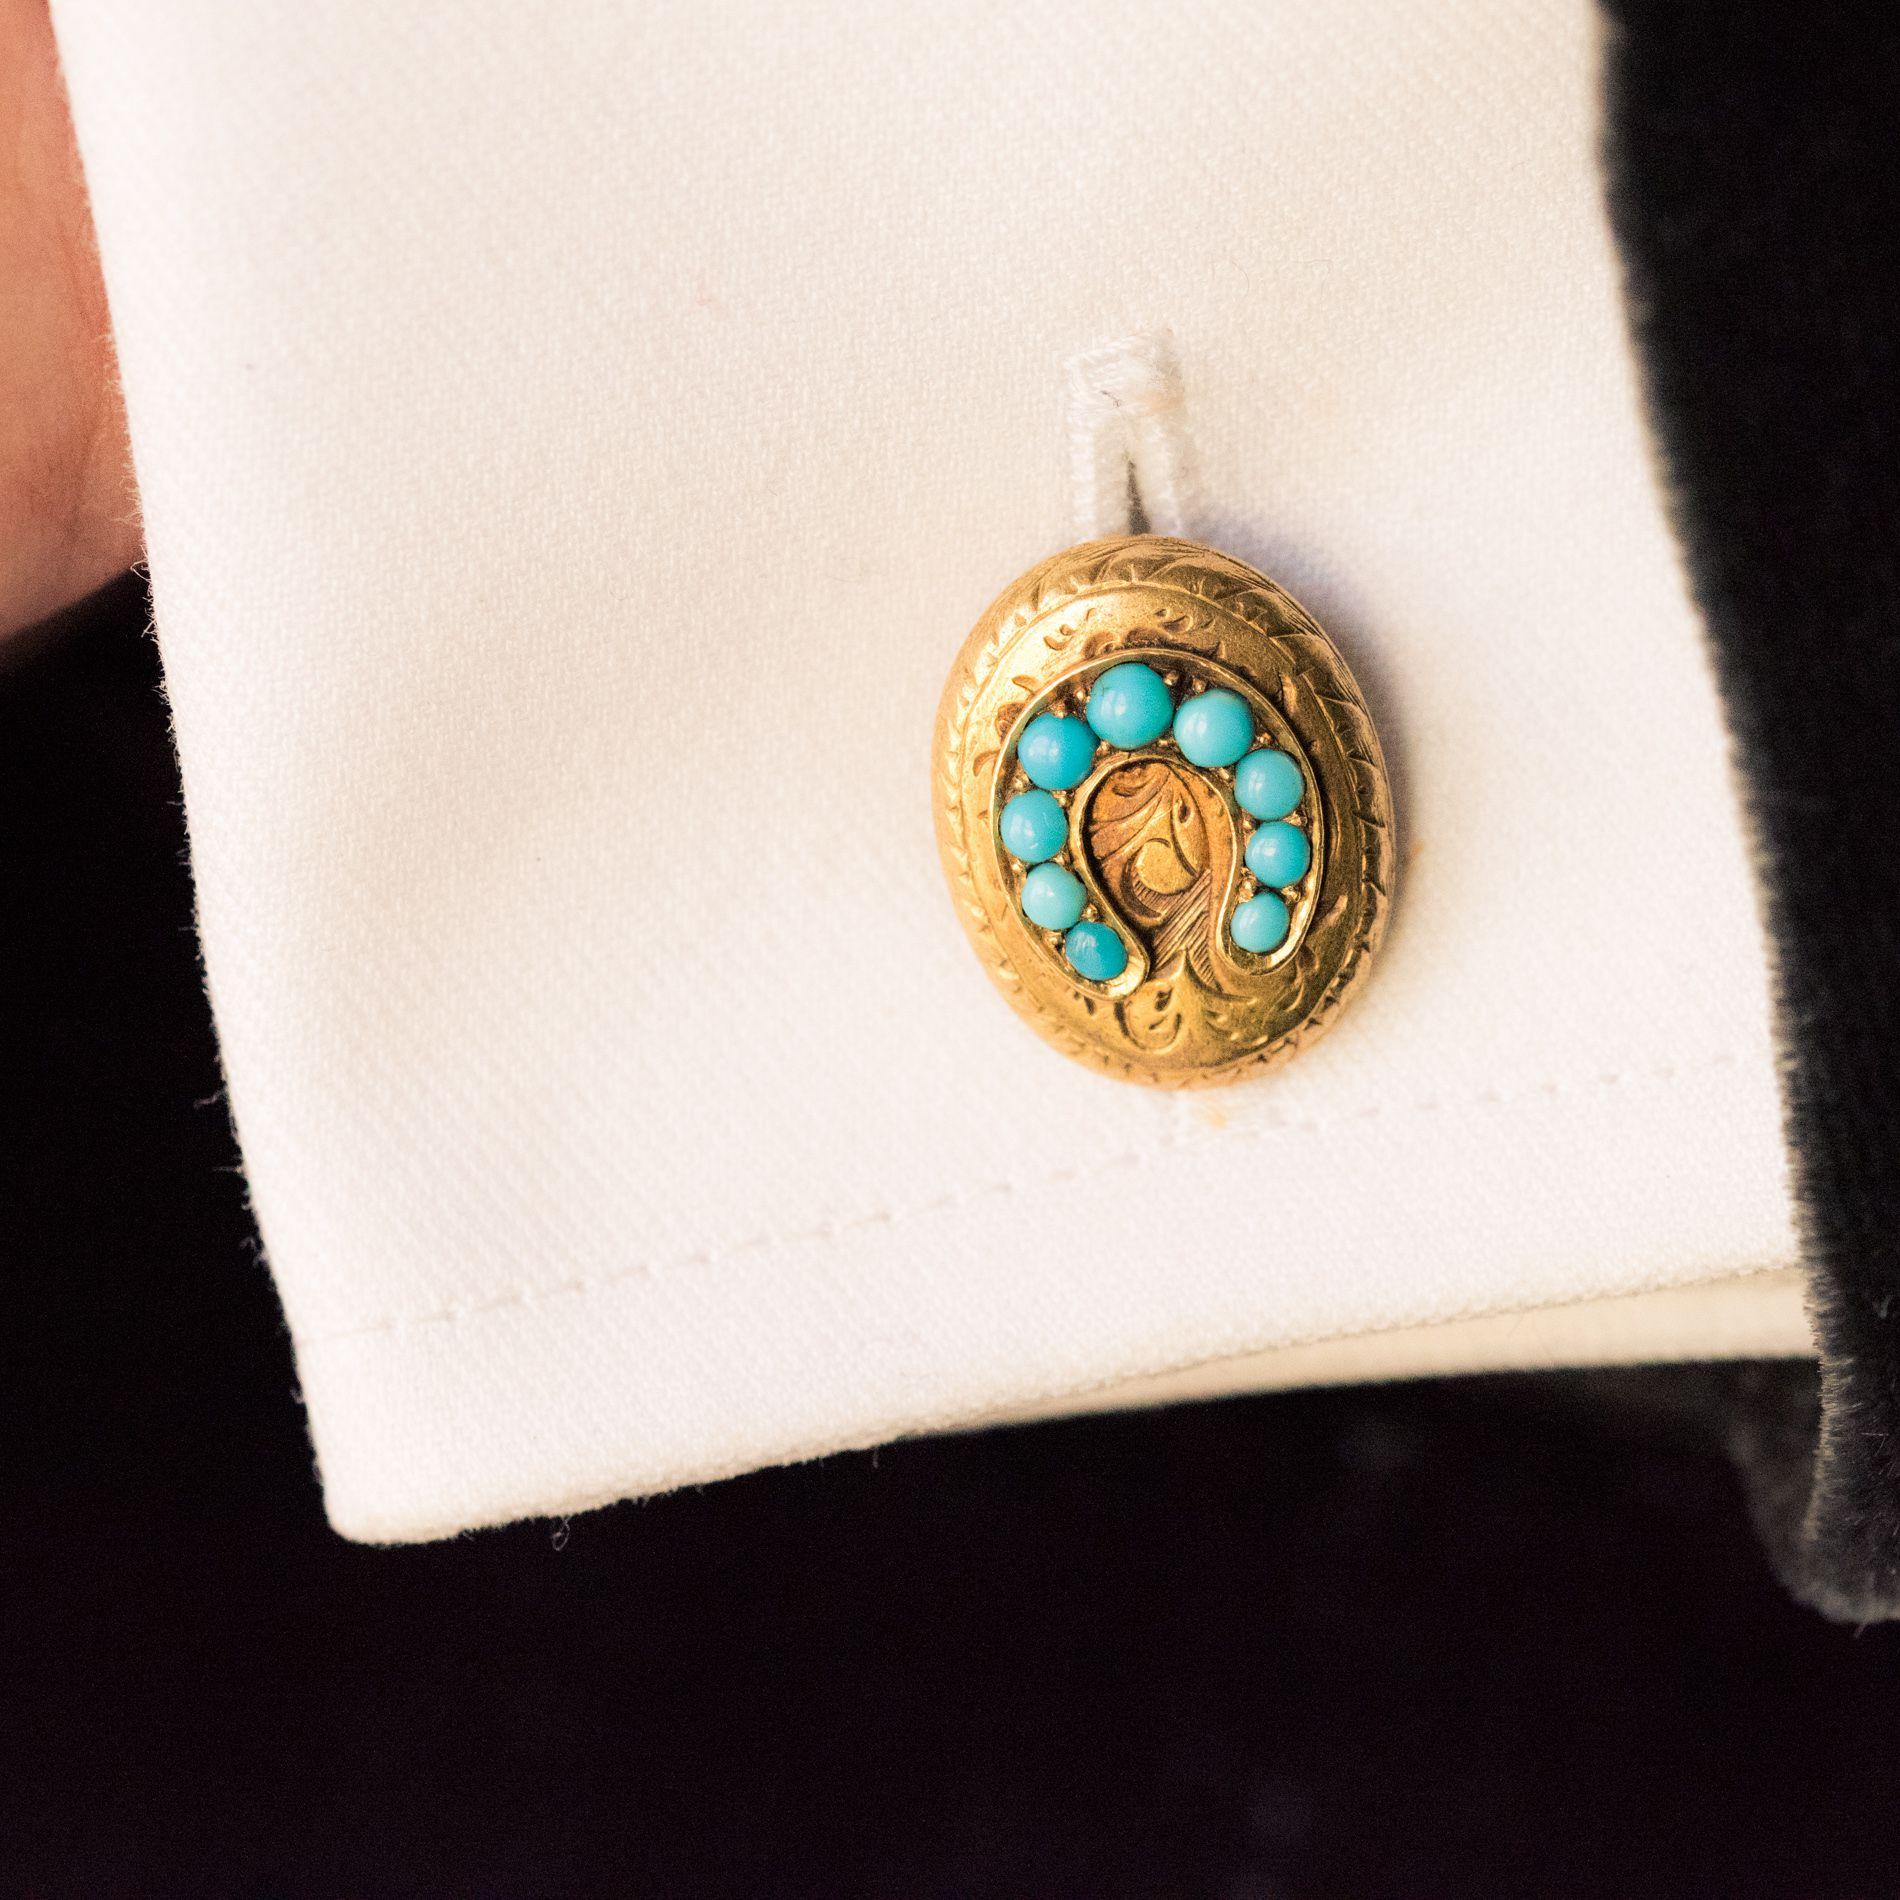 Pair of cufflinks in 18 carat yellow gold. 
Double cufflinks, the exterior design of each gold cufflink is in an engraved oval shape featuring a horseshoe set with turquoise cabochons. The inner design is round in shape with the same design. They